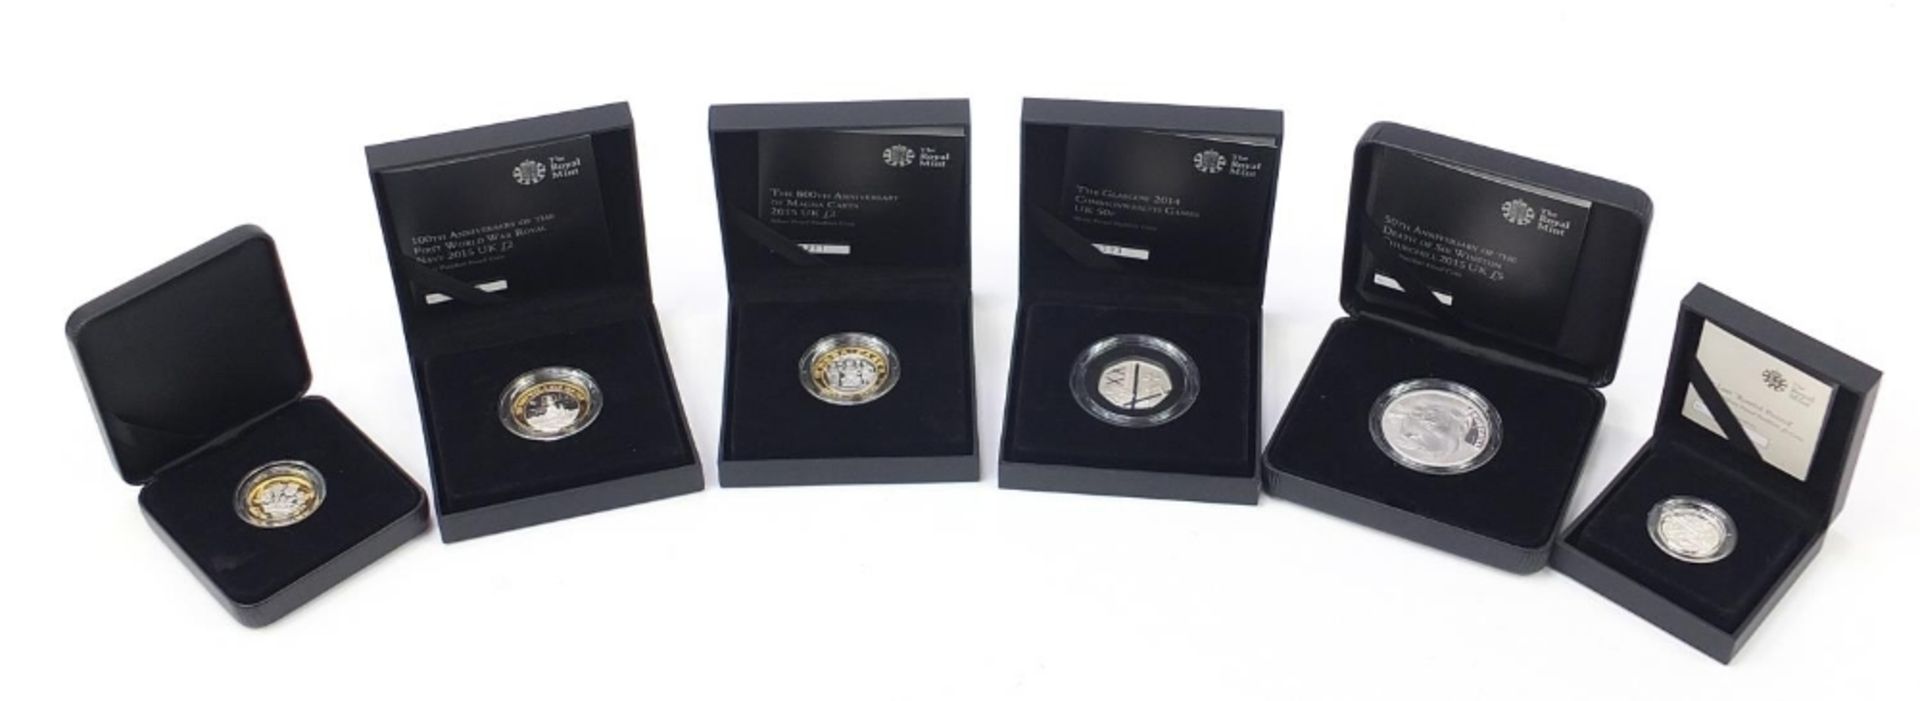 Six silver proof coins with cases and boxes comprising 50th Anniversary of the Death of Sir